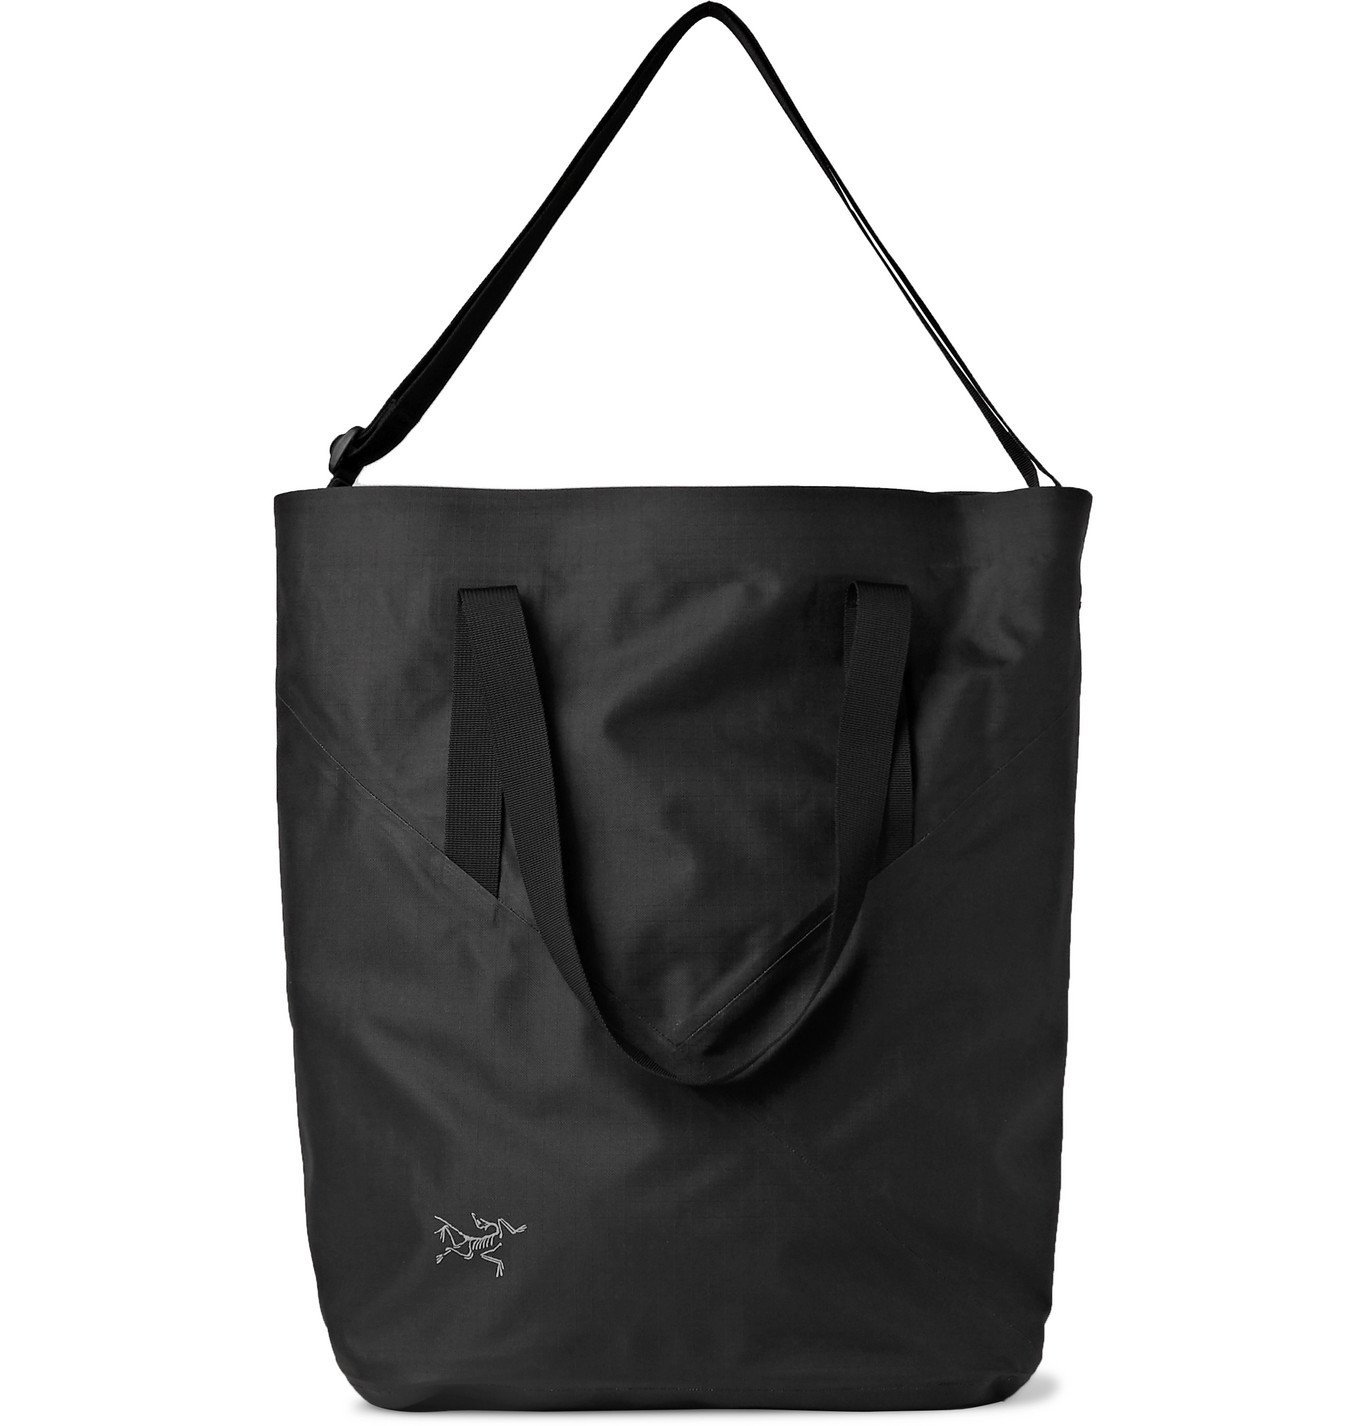 Arcteryx granville 18 tote lucy grin